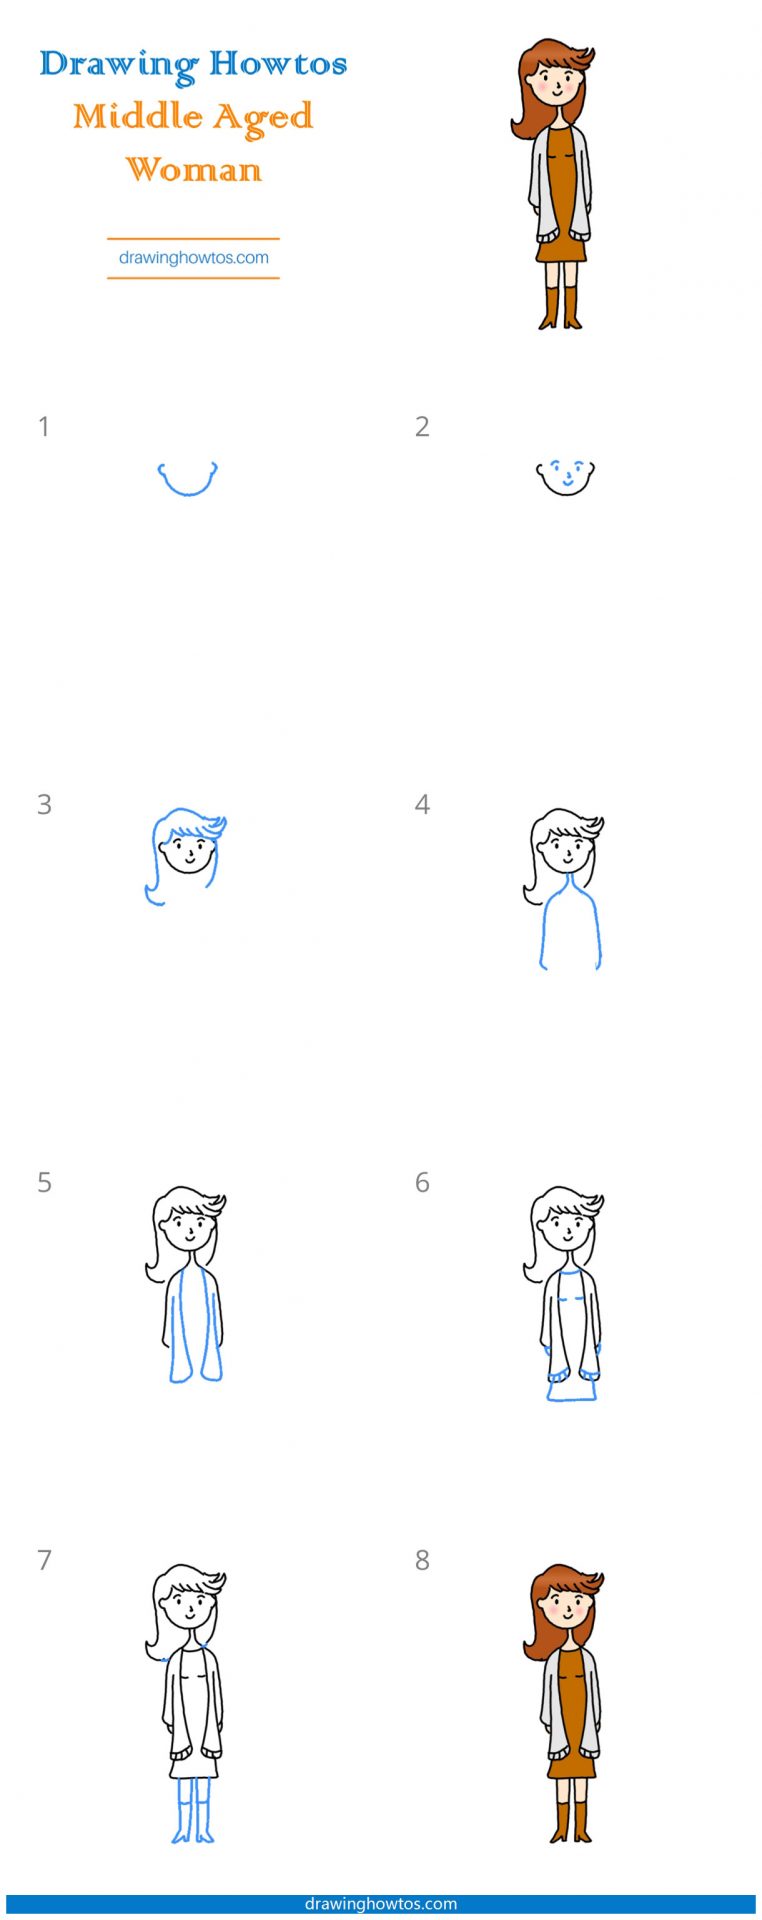 How to Draw a Middle-aged Woman Step by Step